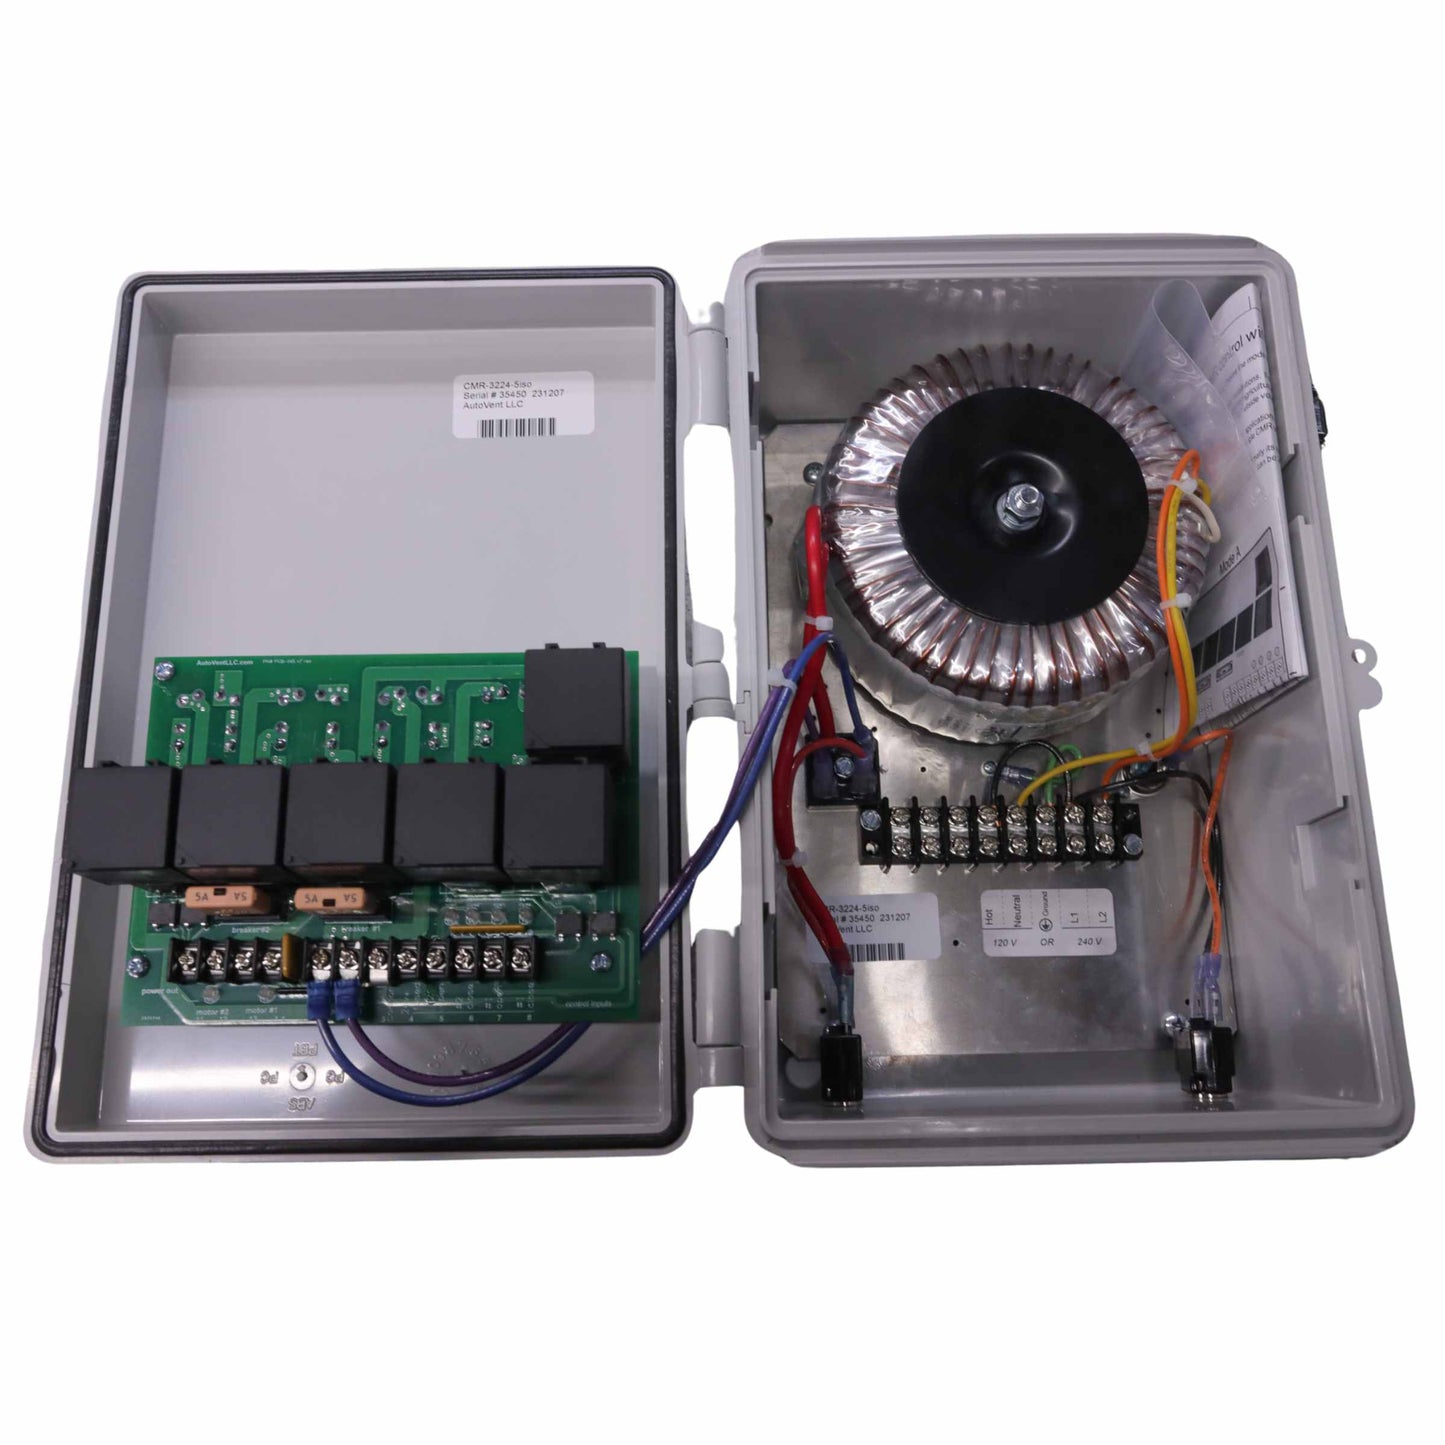 Horticulture and Livestock Vent - computer  to 24vdc vent motor interface  CMR-3224-5